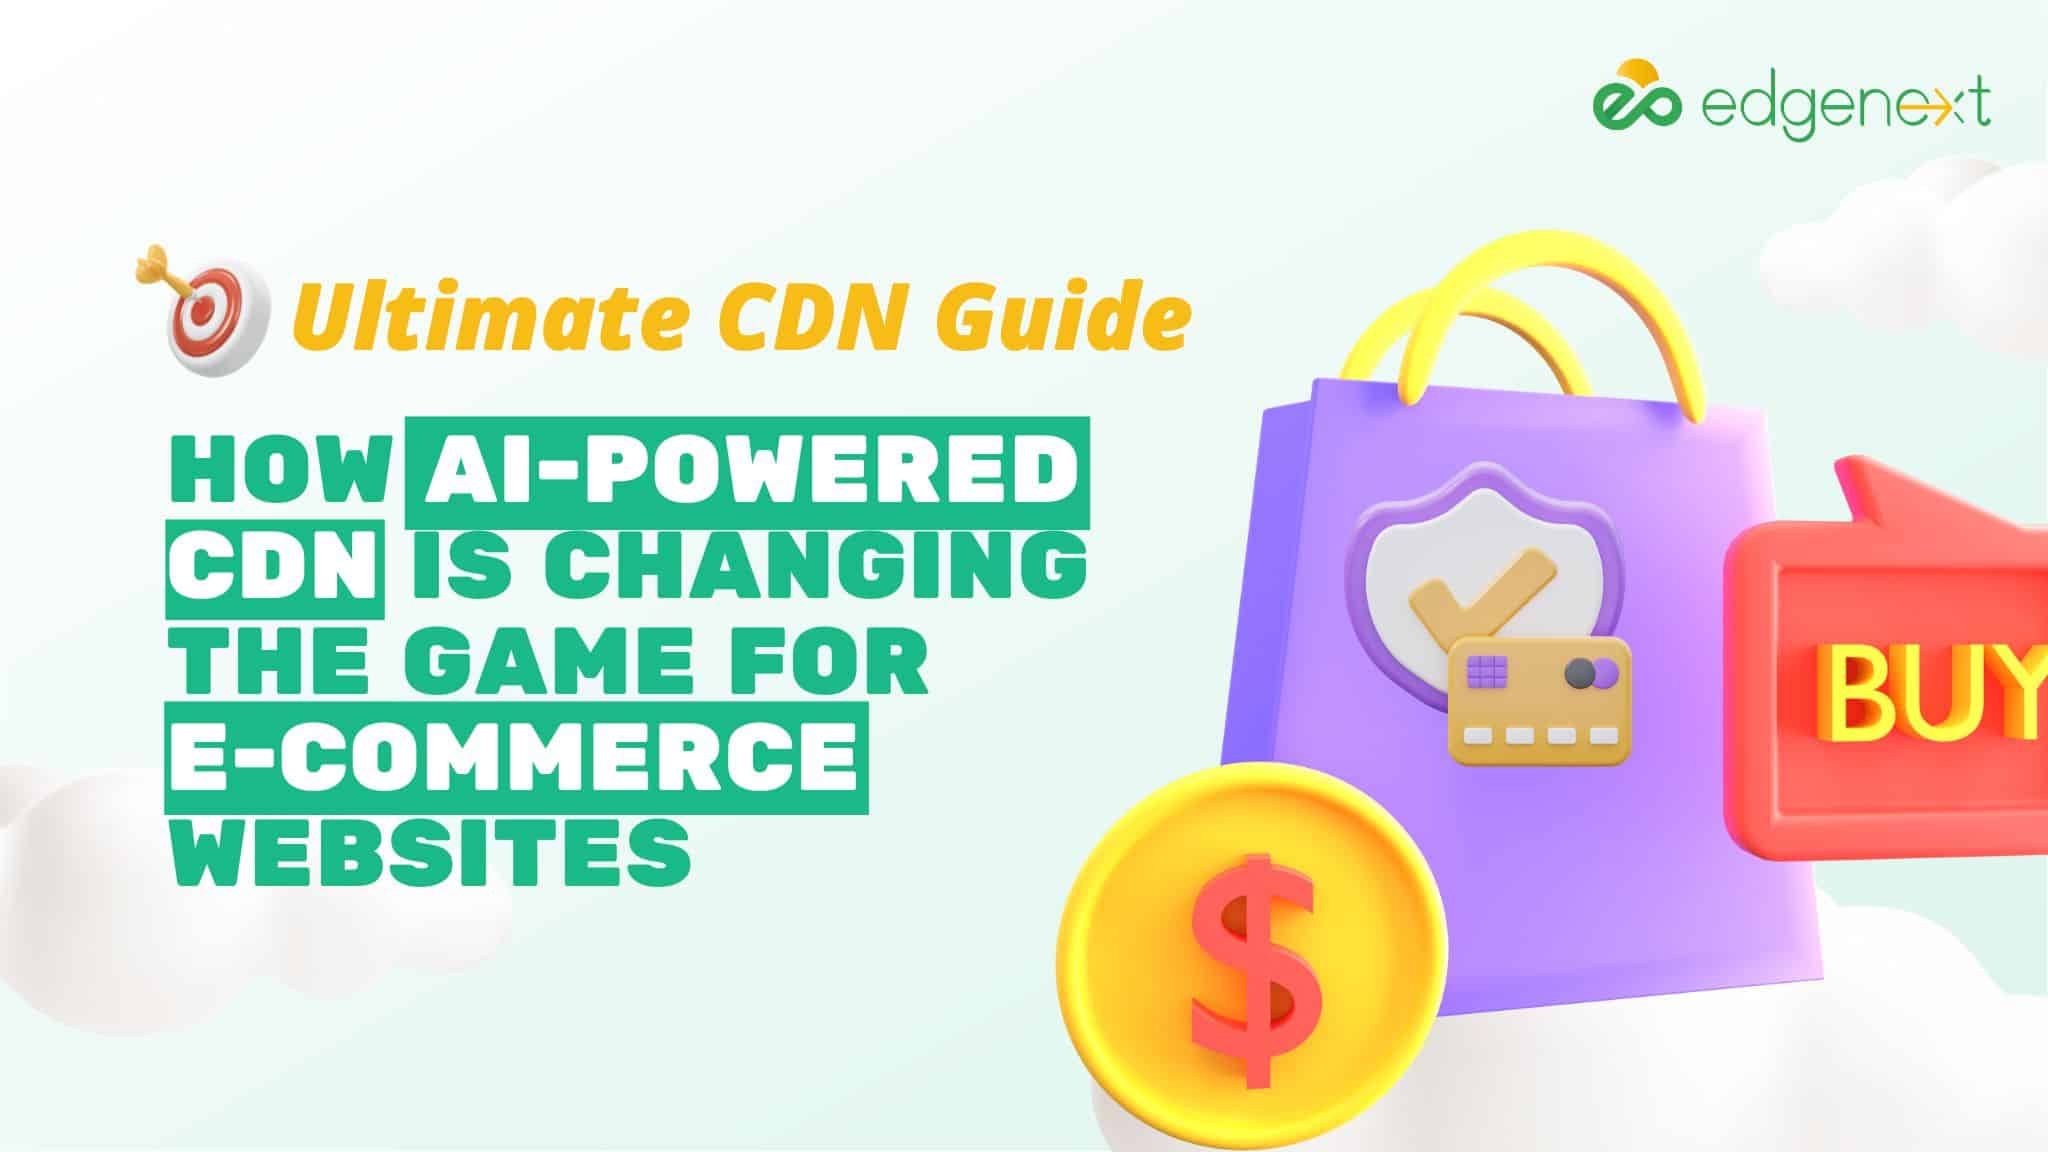 How AI-Powered CDN Is Changing the Game for E-commerce Websites